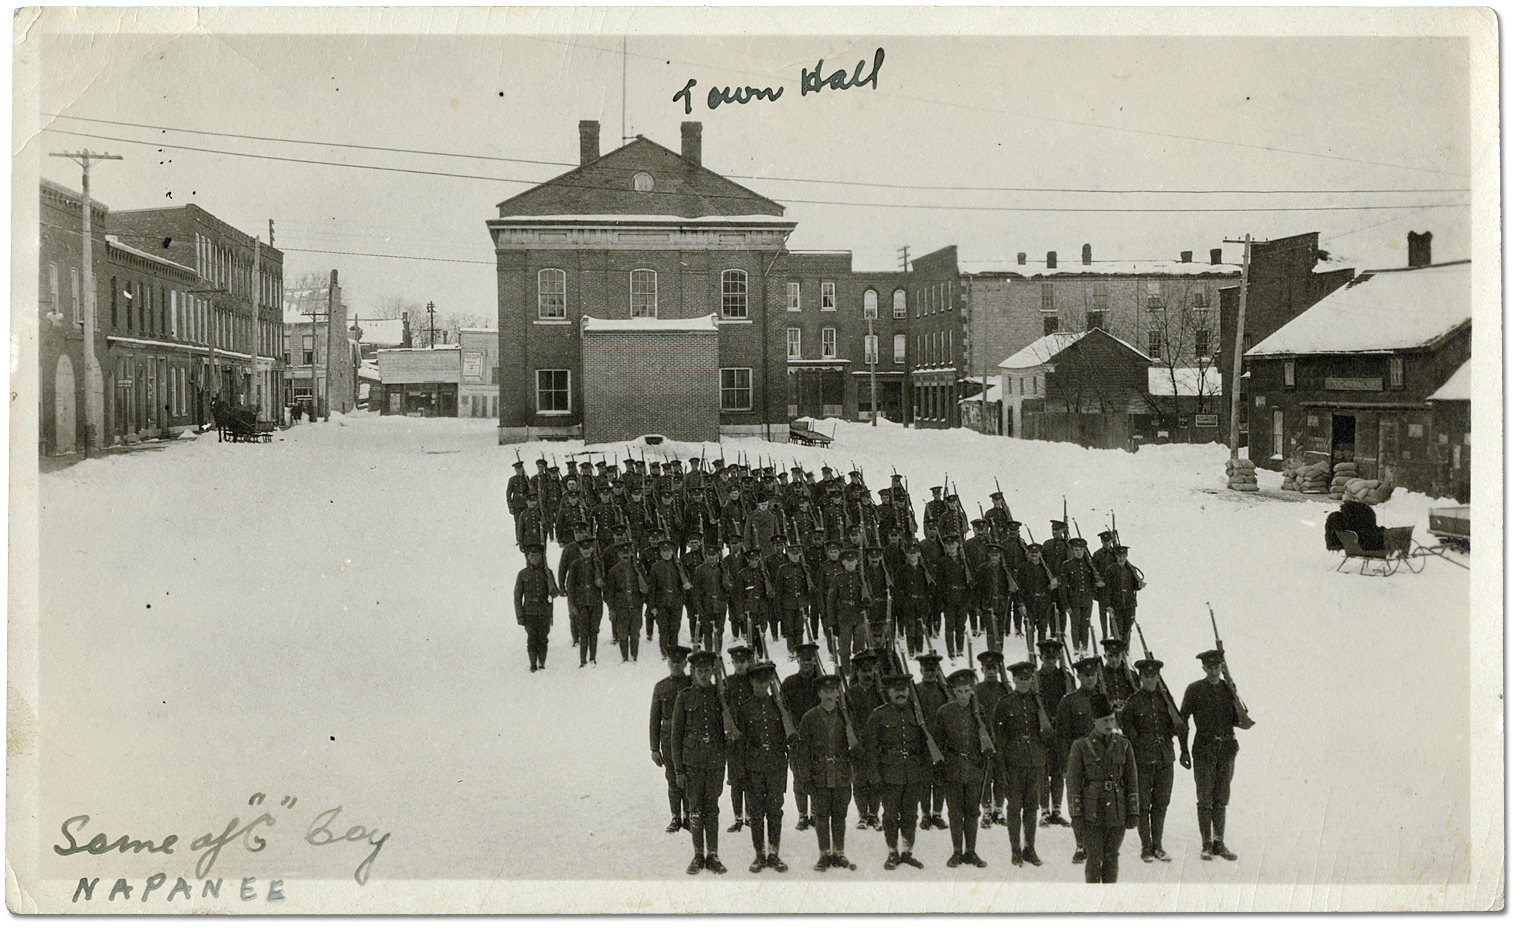 Soldiers of the “C” Company, 80th Overseas Battalion, Canadian Expeditionary Force (C.E.F.) training in front of the town hall in Napanee, Ontario, [ca. 1914-1917]